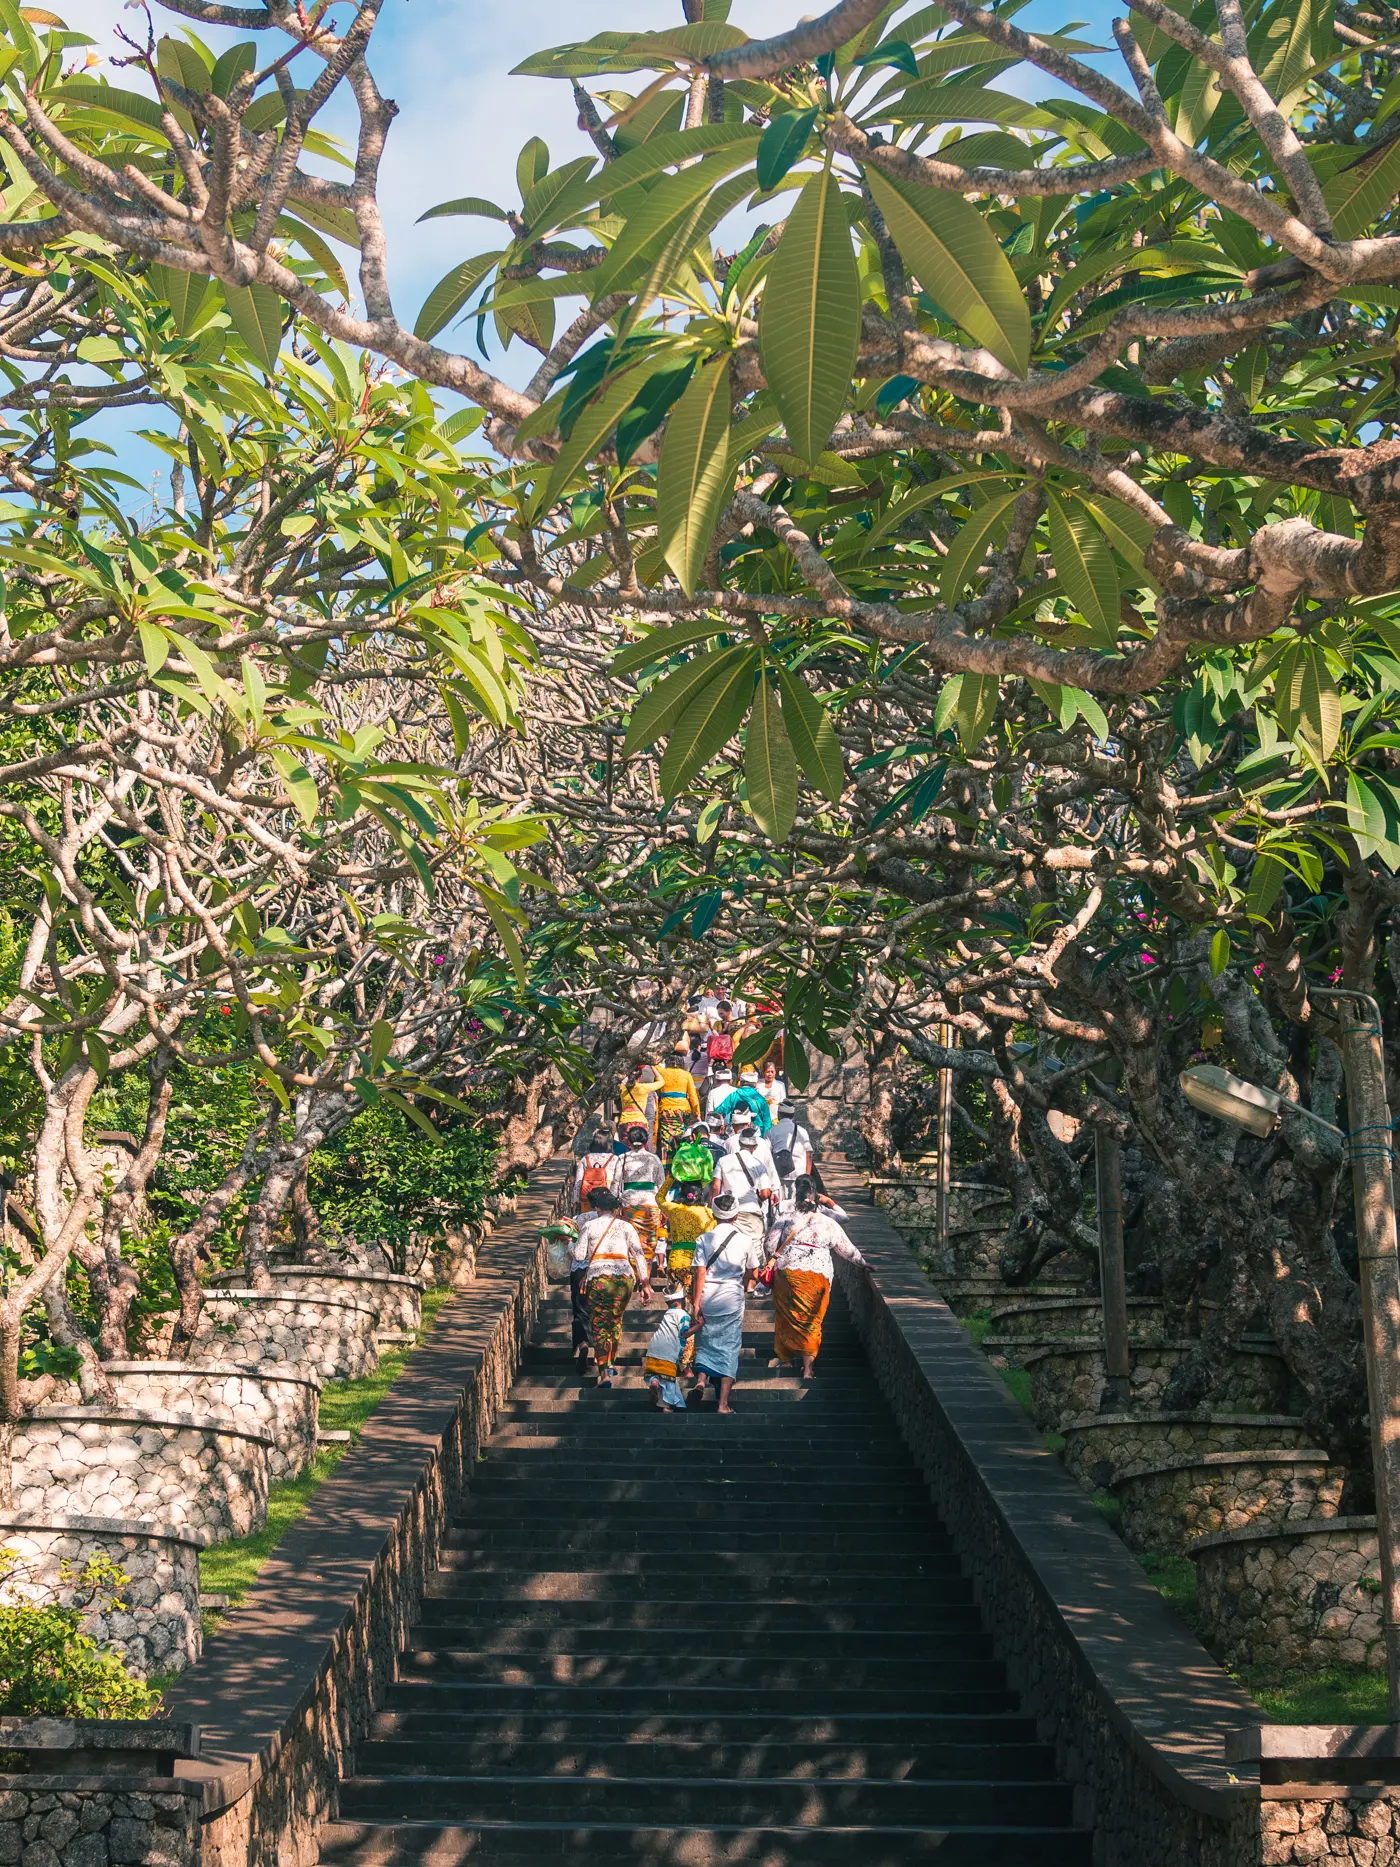 People in traditional Balinese ceremony clothing walking up stone stairs under a canopy of green leaves at Uluwatu Temple.